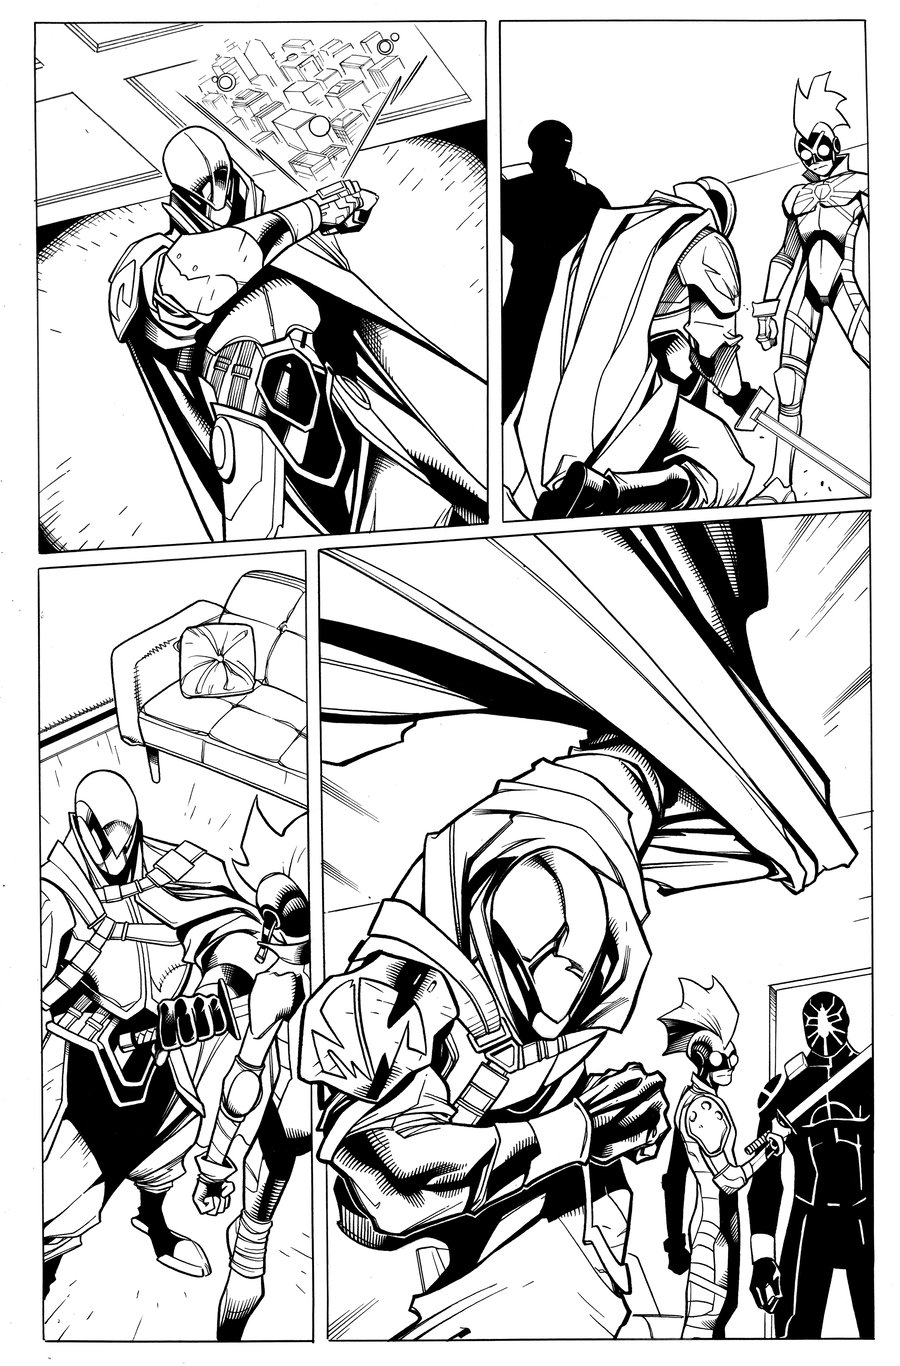 Image of Shadow War Zone #1: Ghostmaker and Clownhunter PG10